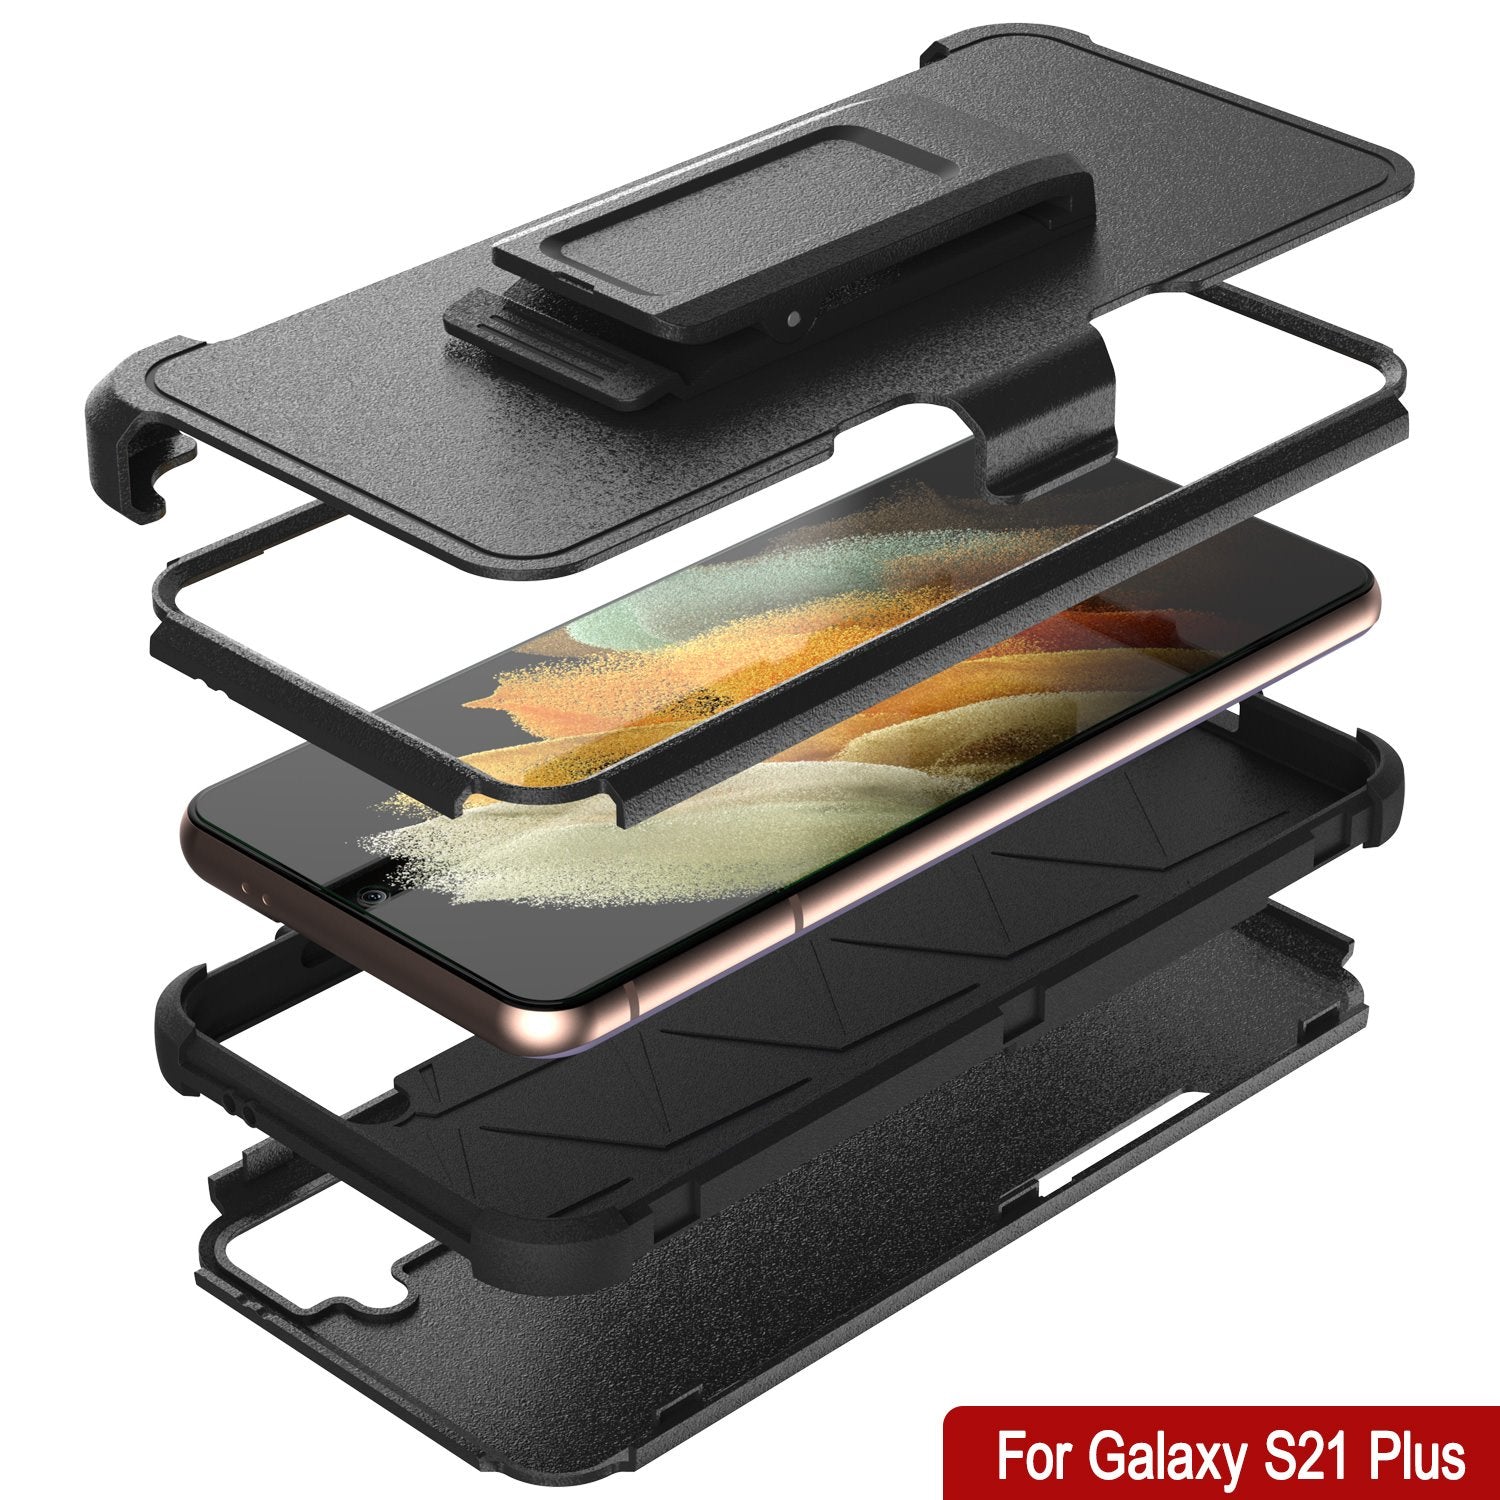 Punkcase for Galaxy S21+ Plus 5G Belt Clip Multilayer Holster Case [Patron Series] [Black]